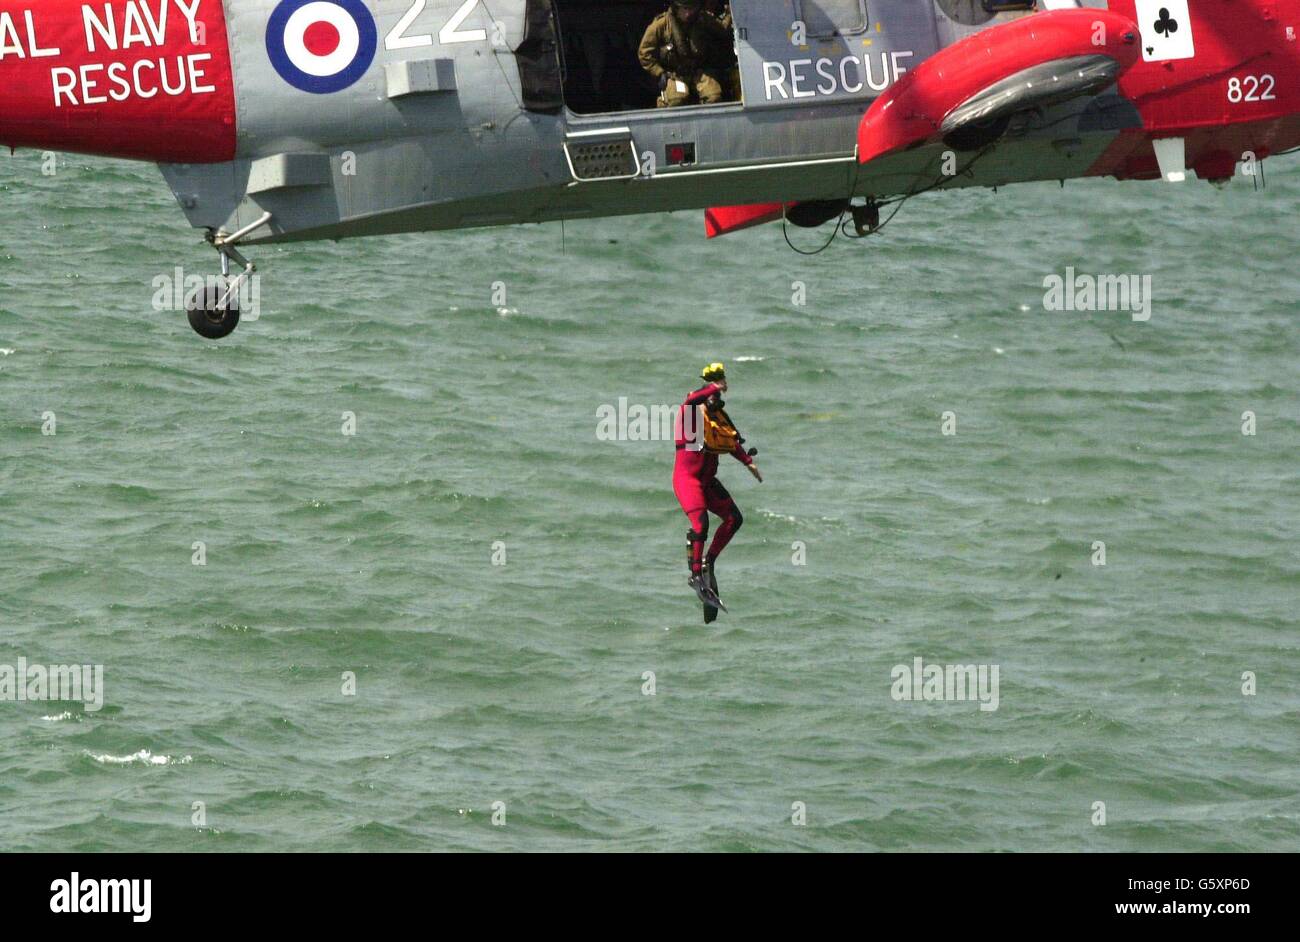 A Royal Navy diver - who sensationally jumped from a hovering helicopter and swam to the Ark Royal to present a posey to Britain's Queen Elizabeth II during the Review of the Fleet on Britain's aircraft carrier The Ark Royal, in Portsmouth. Stock Photo